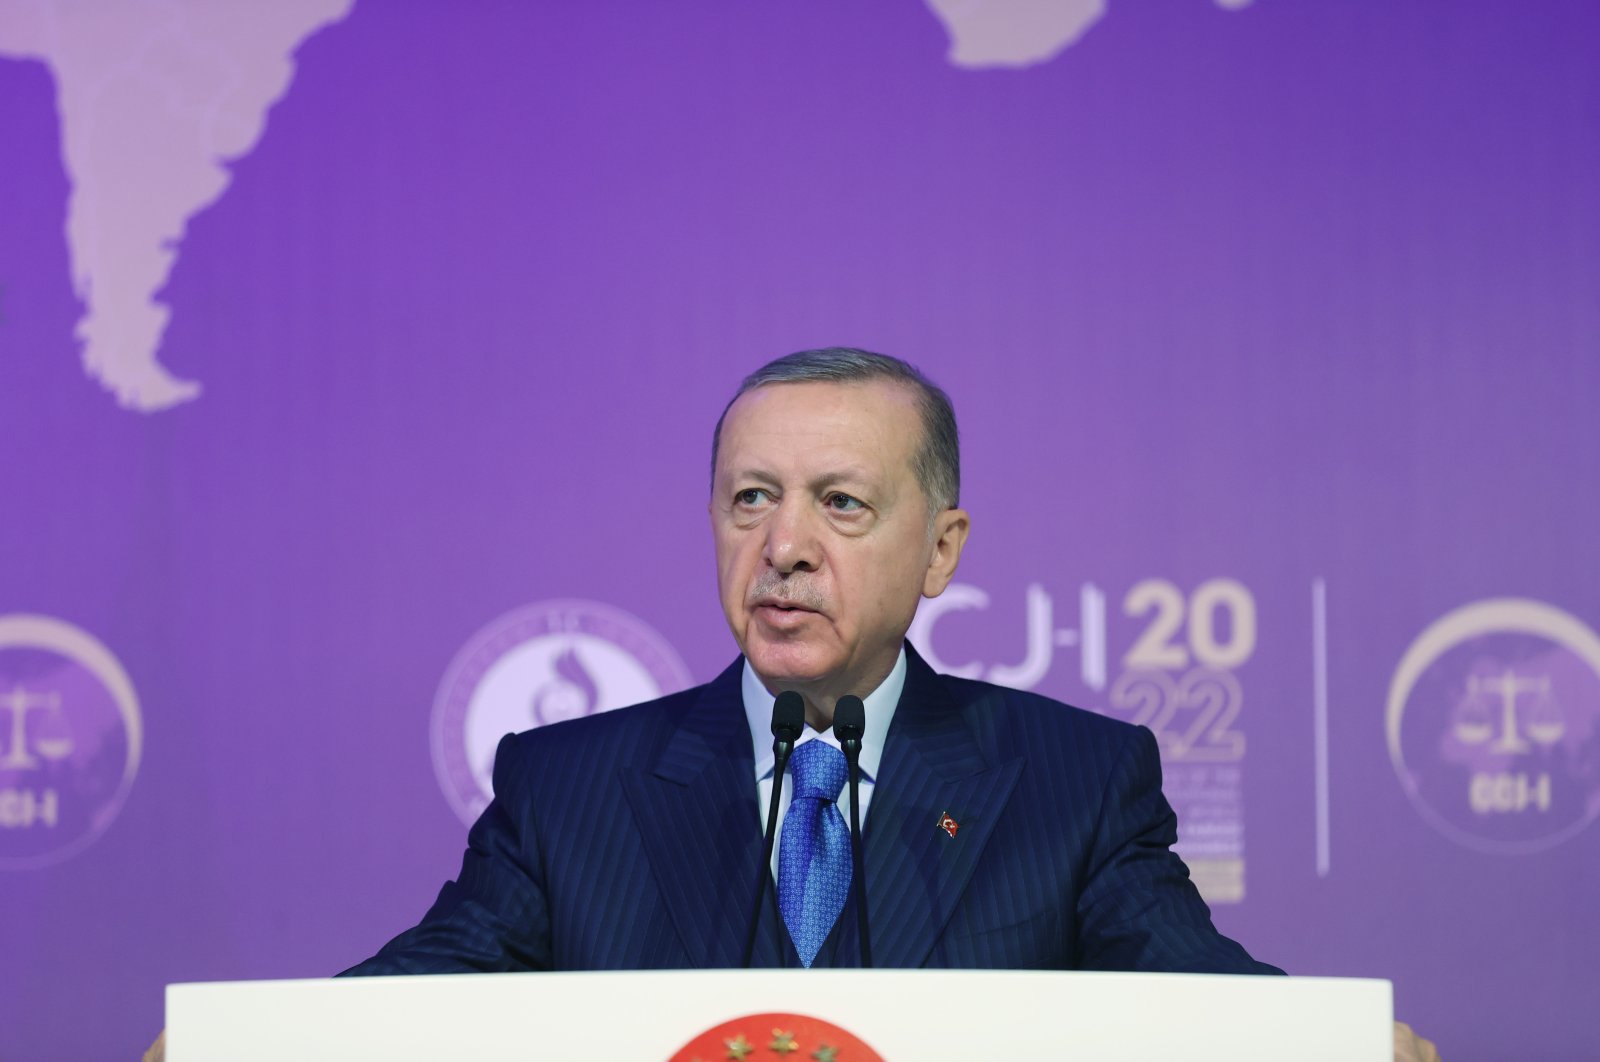 President Recep Tayyip Erdoğan speaks at the inaugural congress of the Conference of Constitutional Jurisdictions of the Islamic World in Istanbul, Türkiye, Dec. 23, 2022. (AA Photo)